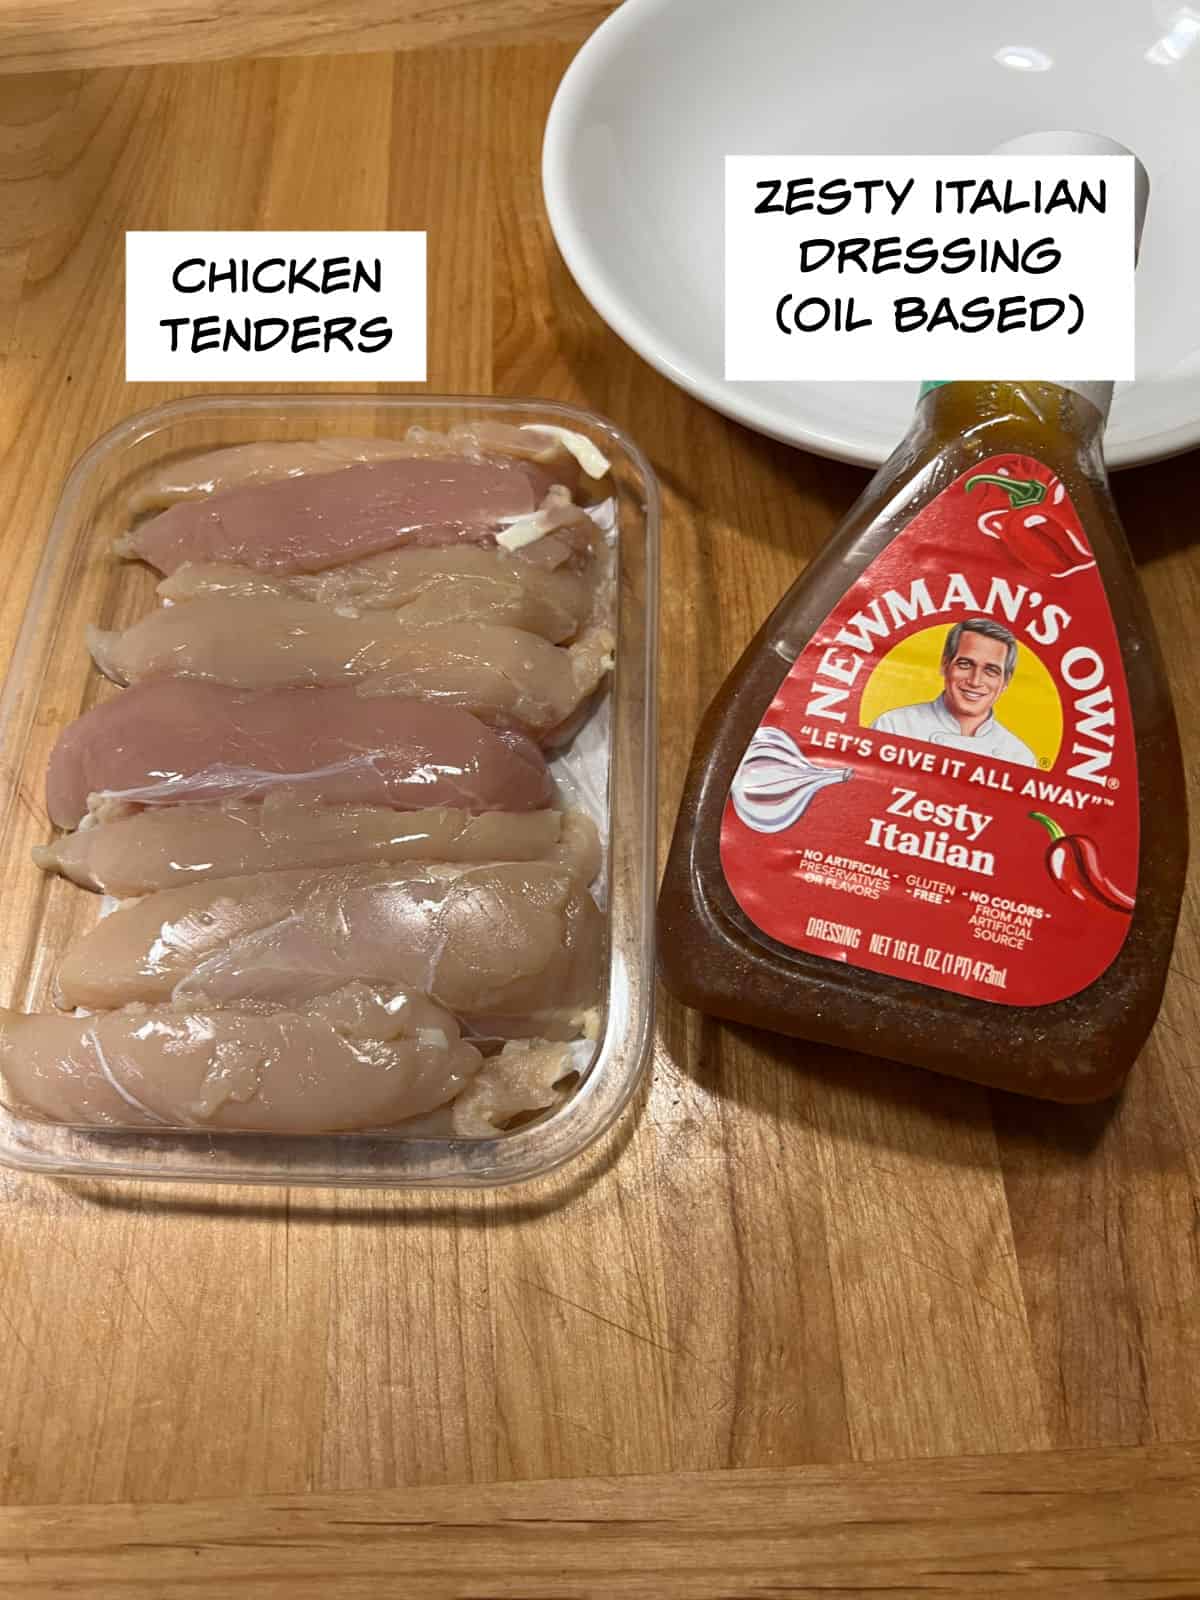 Ingredients: Zesty Italian dressing and a package of chicken tenders.